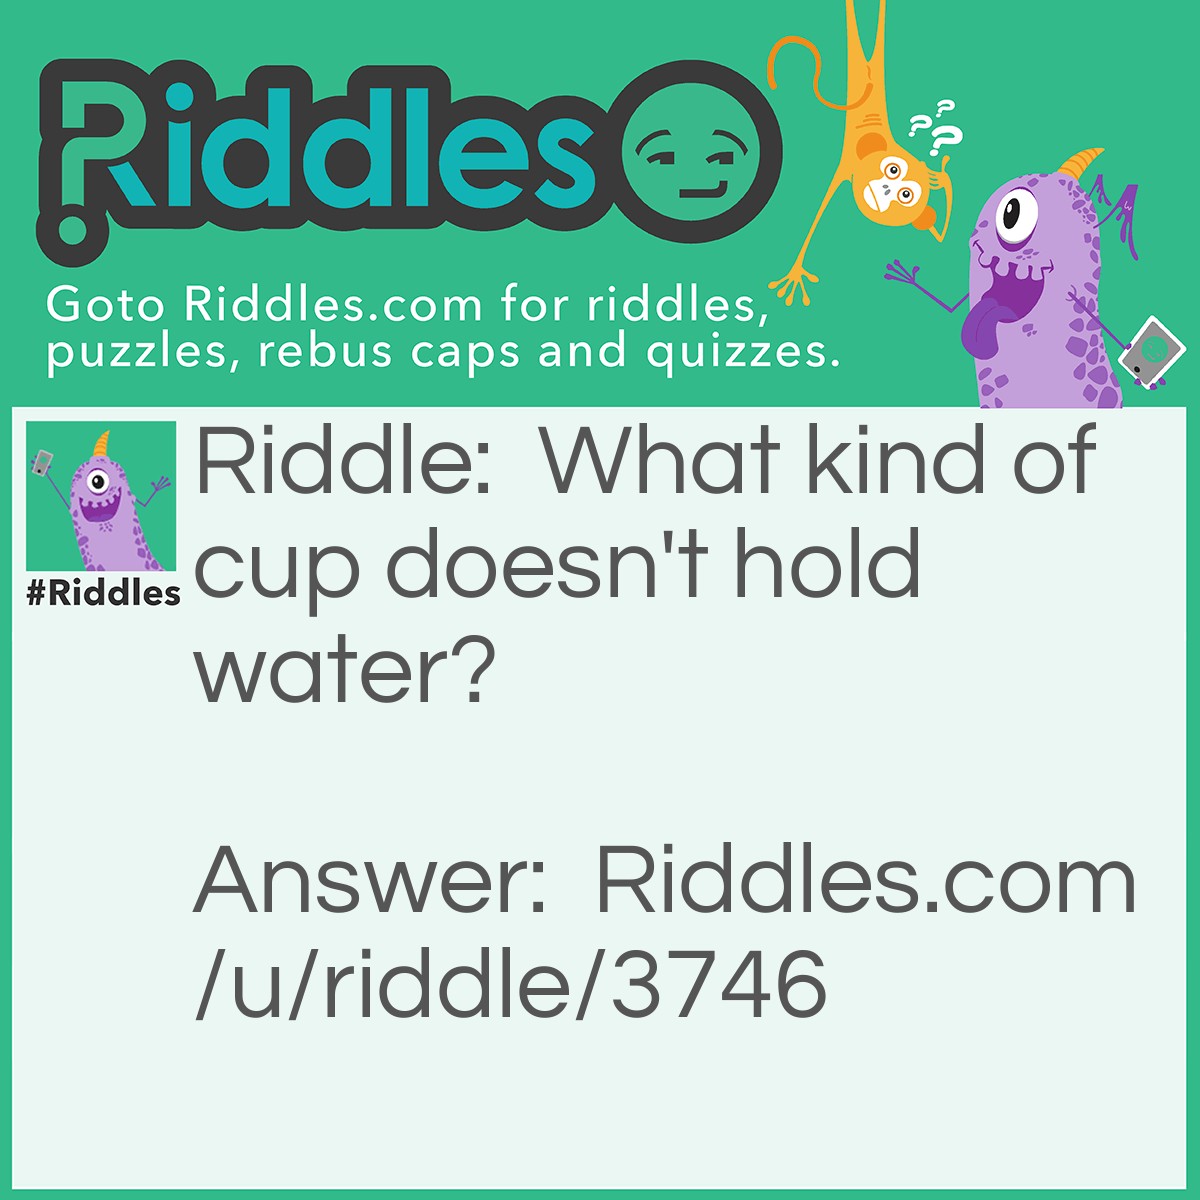 Riddle: What kind of cup doesn't hold water? Answer: A Cupcake.